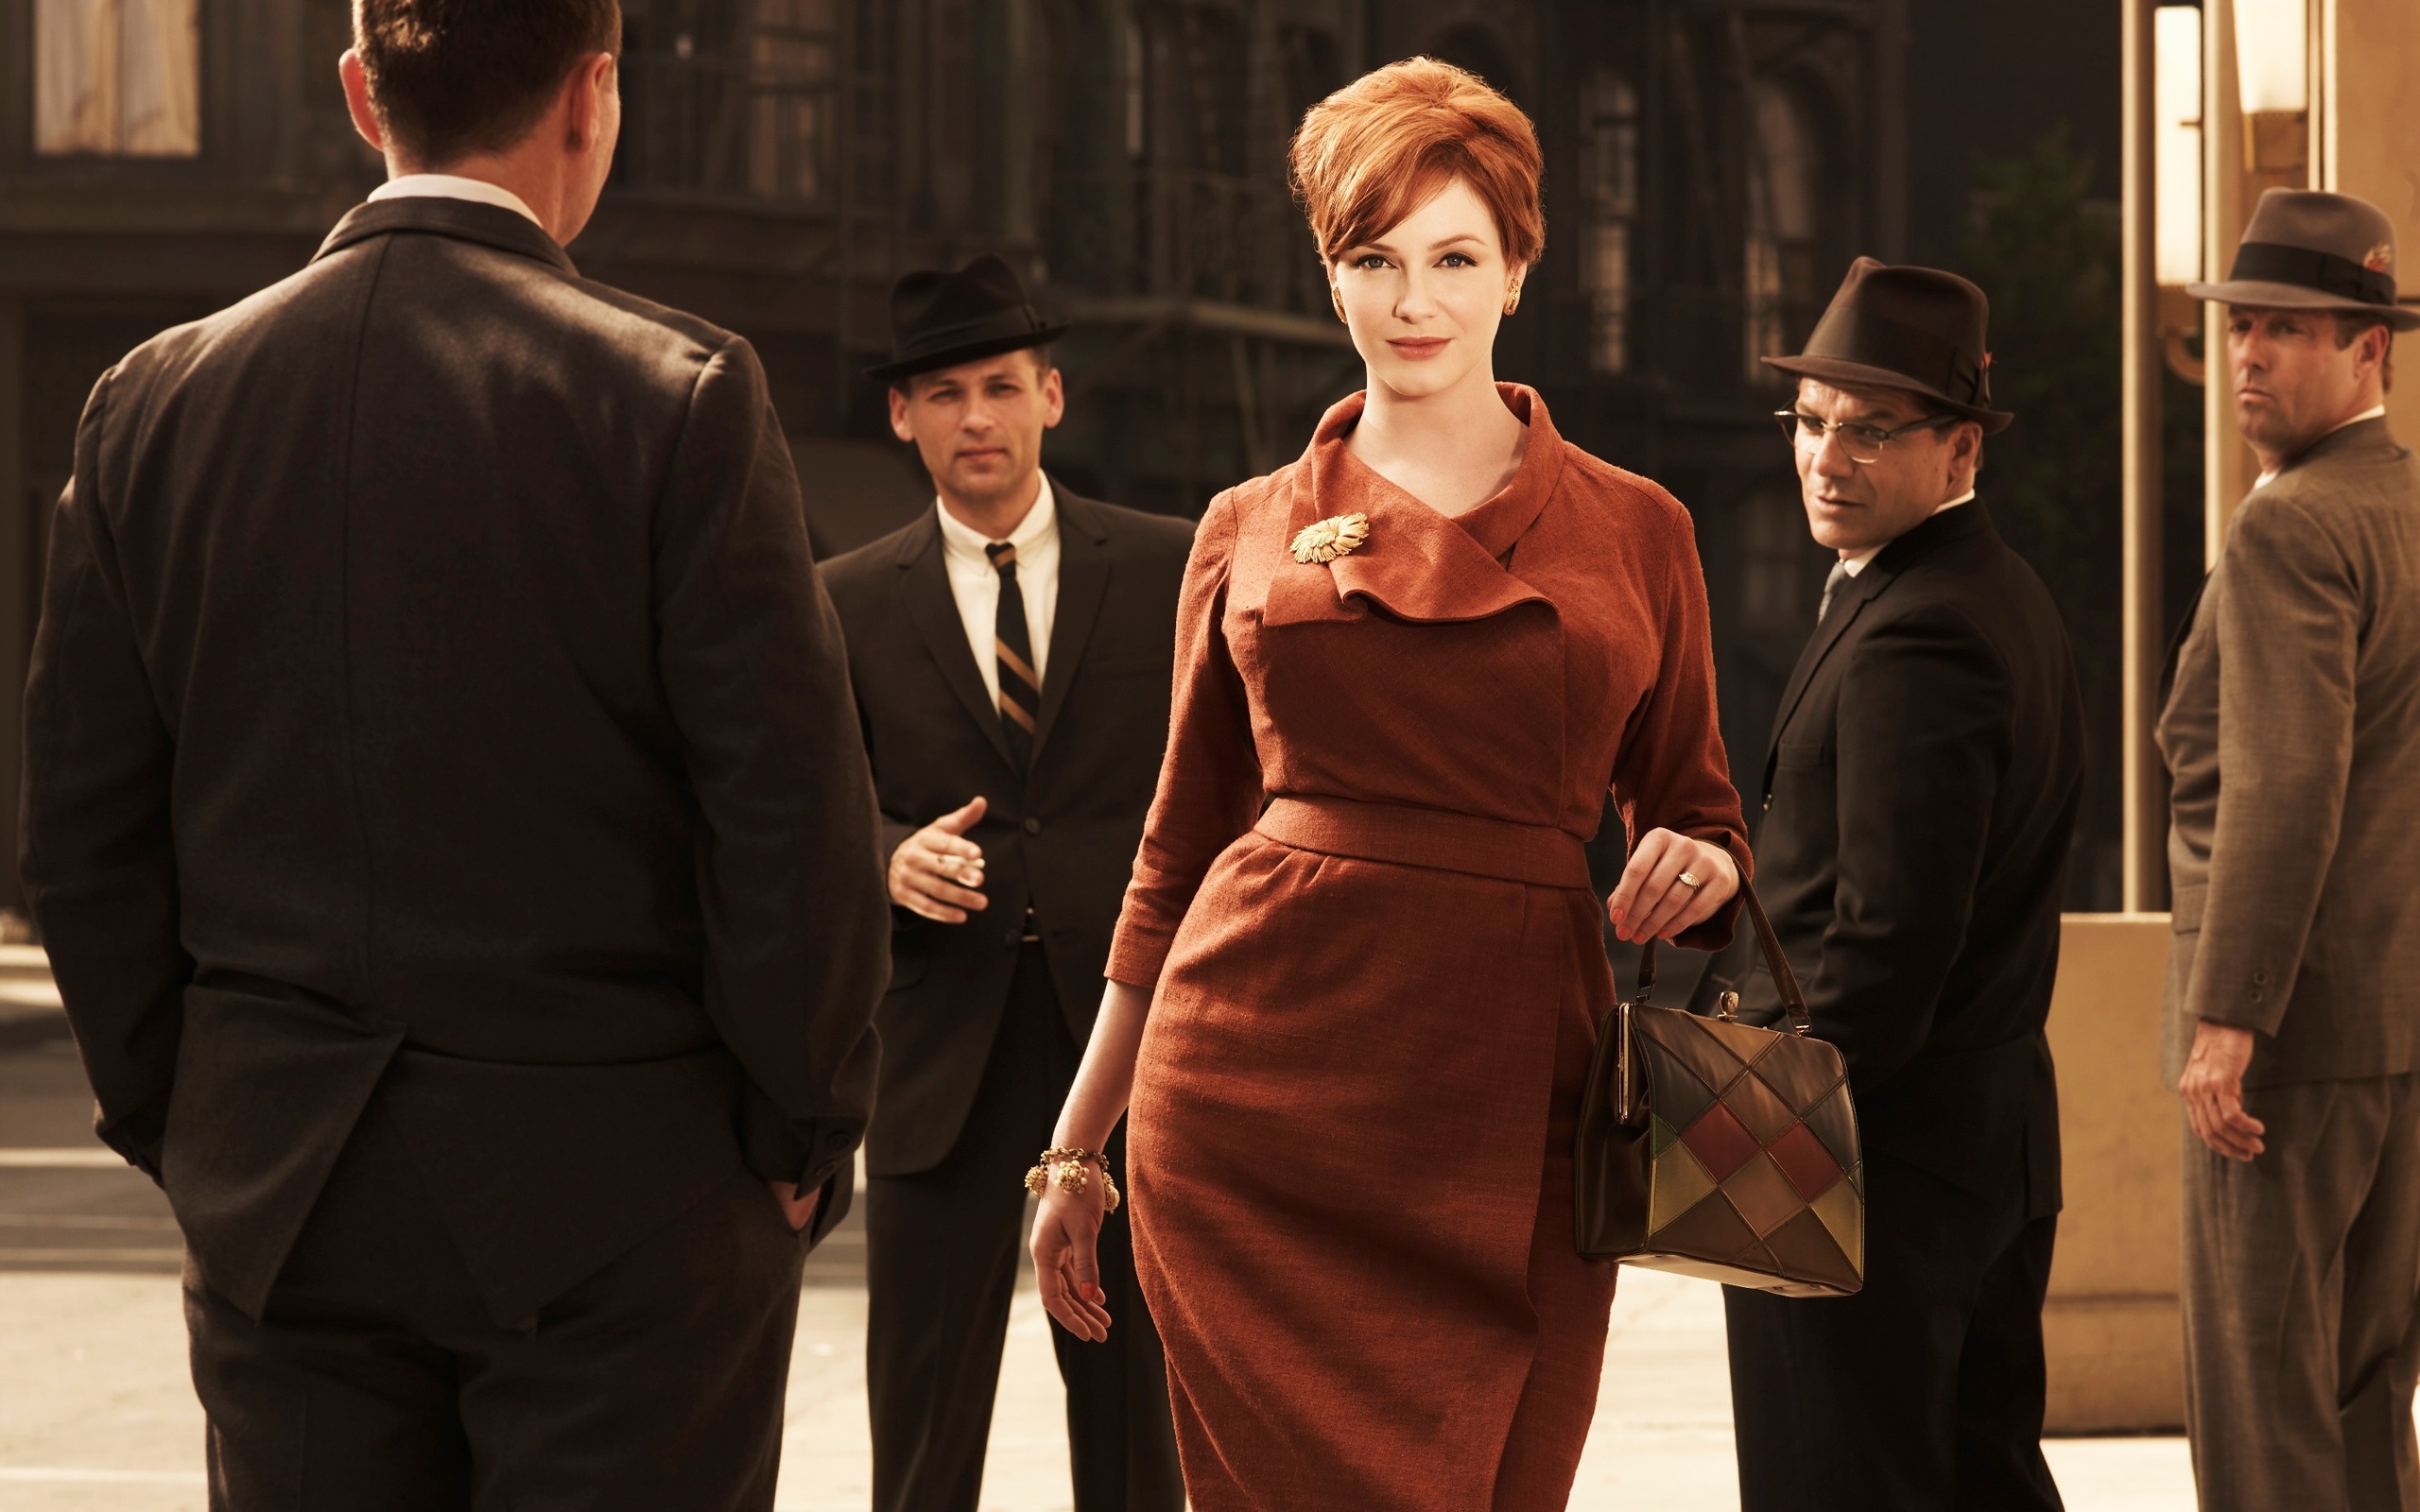 Mad Men (TV Series): Joan Holloway, Office manager, Head of the secretarial pool at Sterling Cooper. 2560x1600 HD Background.